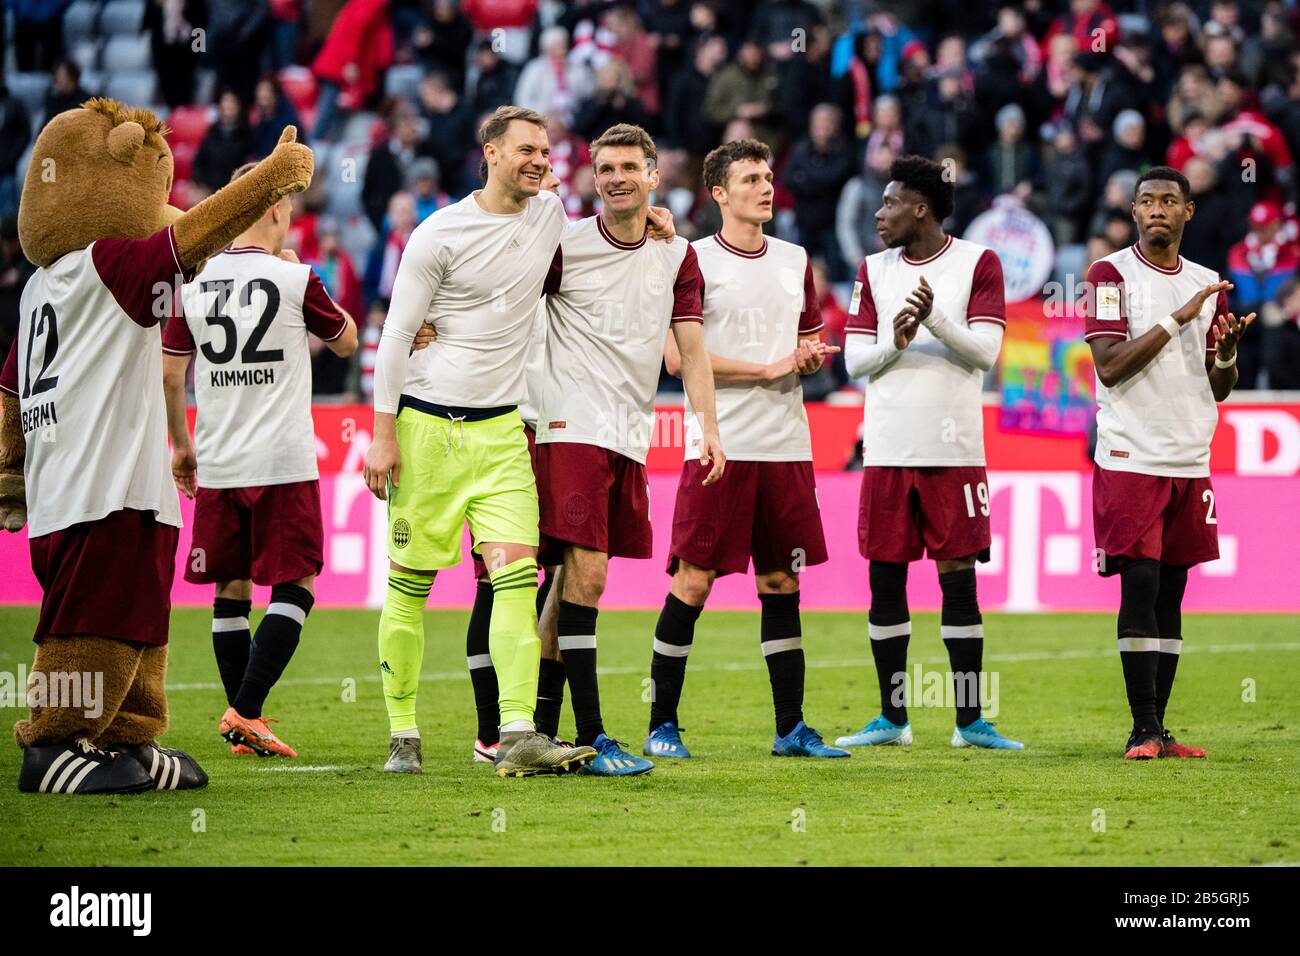 08 March 2020, Bavaria, Munich: Football: Bundesliga, Bayern Munich - FC Augsburg, 25th matchday in the Allianz Arena. Mascot Berni (l-r), goalkeeper Manuel Neuer, Thomas Müller, Benjamin Pavard, Alphonso Davies and David Alaba from FC Bayern Munich celebrate their victory with the fans. Photo: Matthias Balk/dpa - IMPORTANT NOTE: In accordance with the regulations of the DFL Deutsche Fußball Liga and the DFB Deutscher Fußball-Bund, it is prohibited to exploit or have exploited in the stadium and/or from the game taken photographs in the form of sequence images and/or video-like photo series. Stock Photo